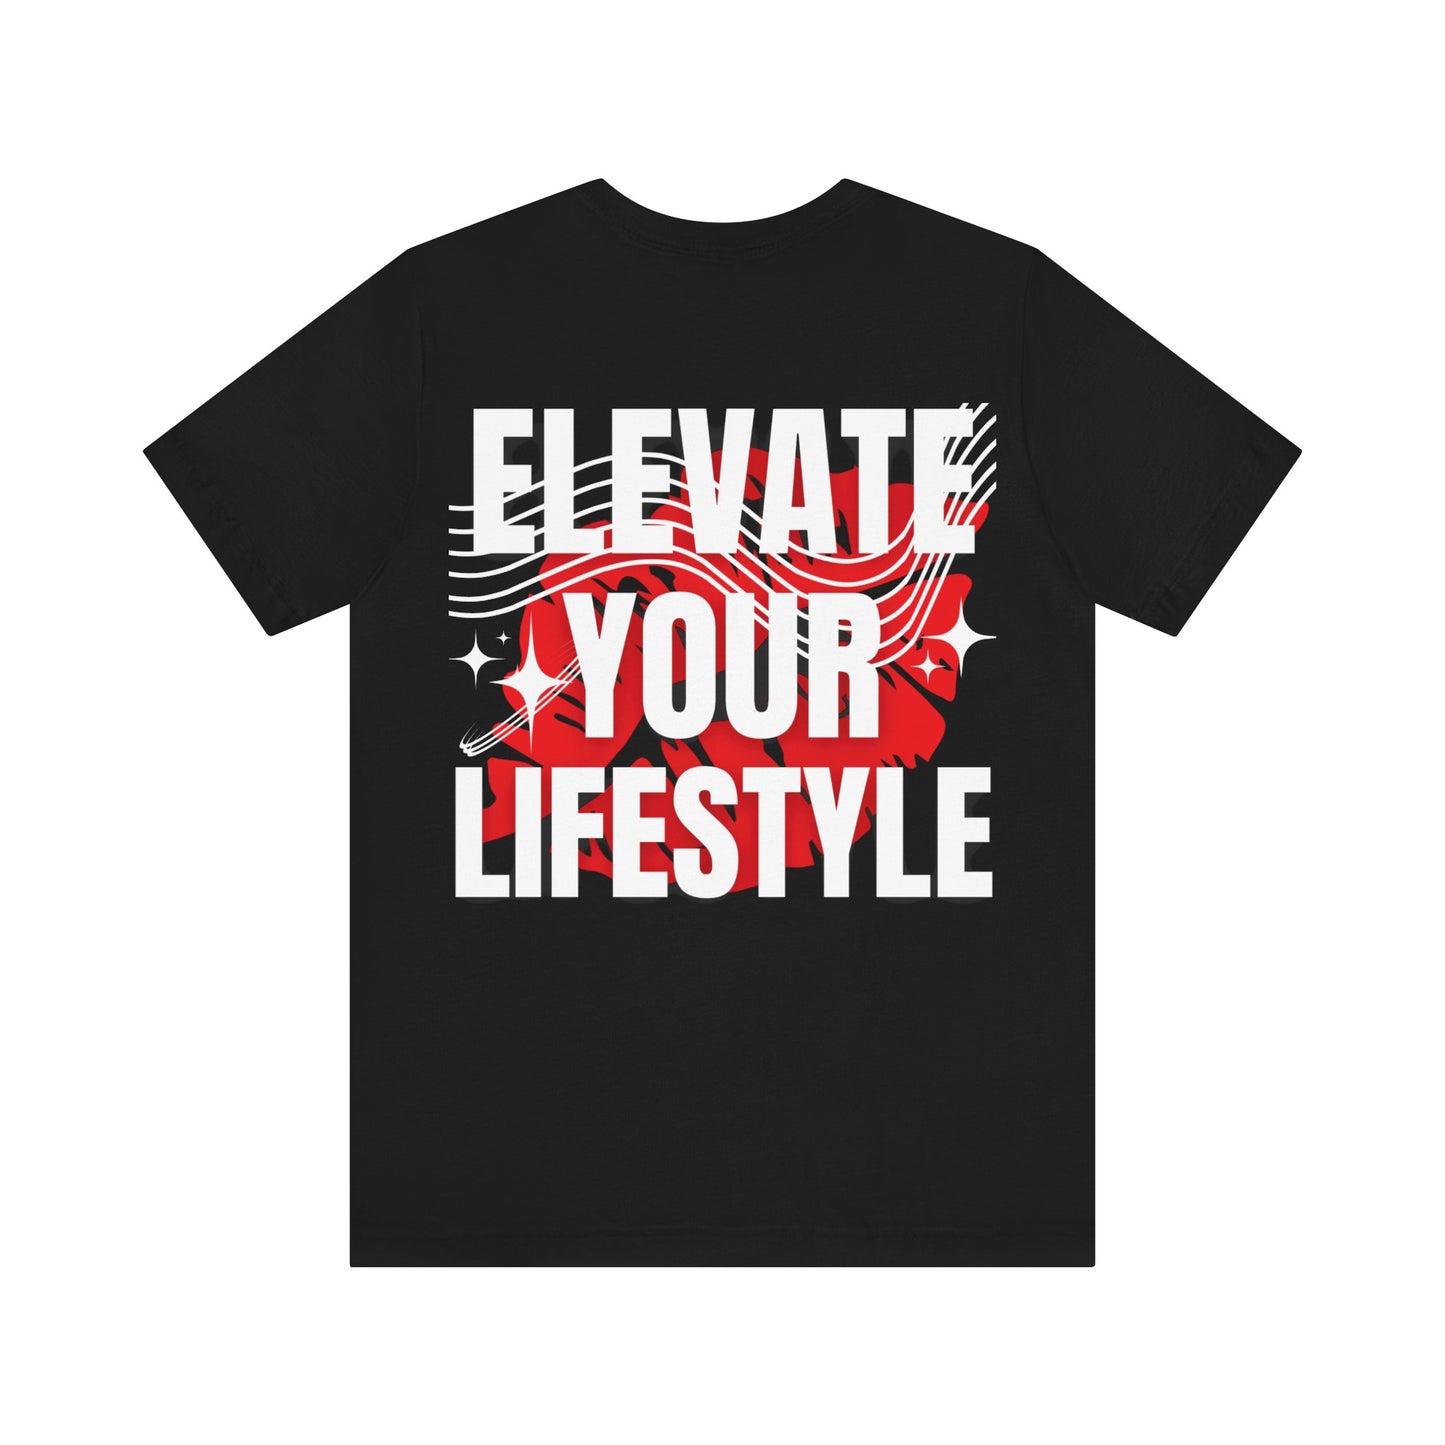 "ELEVATE YOUR LIFESTYLE" Graphic T-Shirt